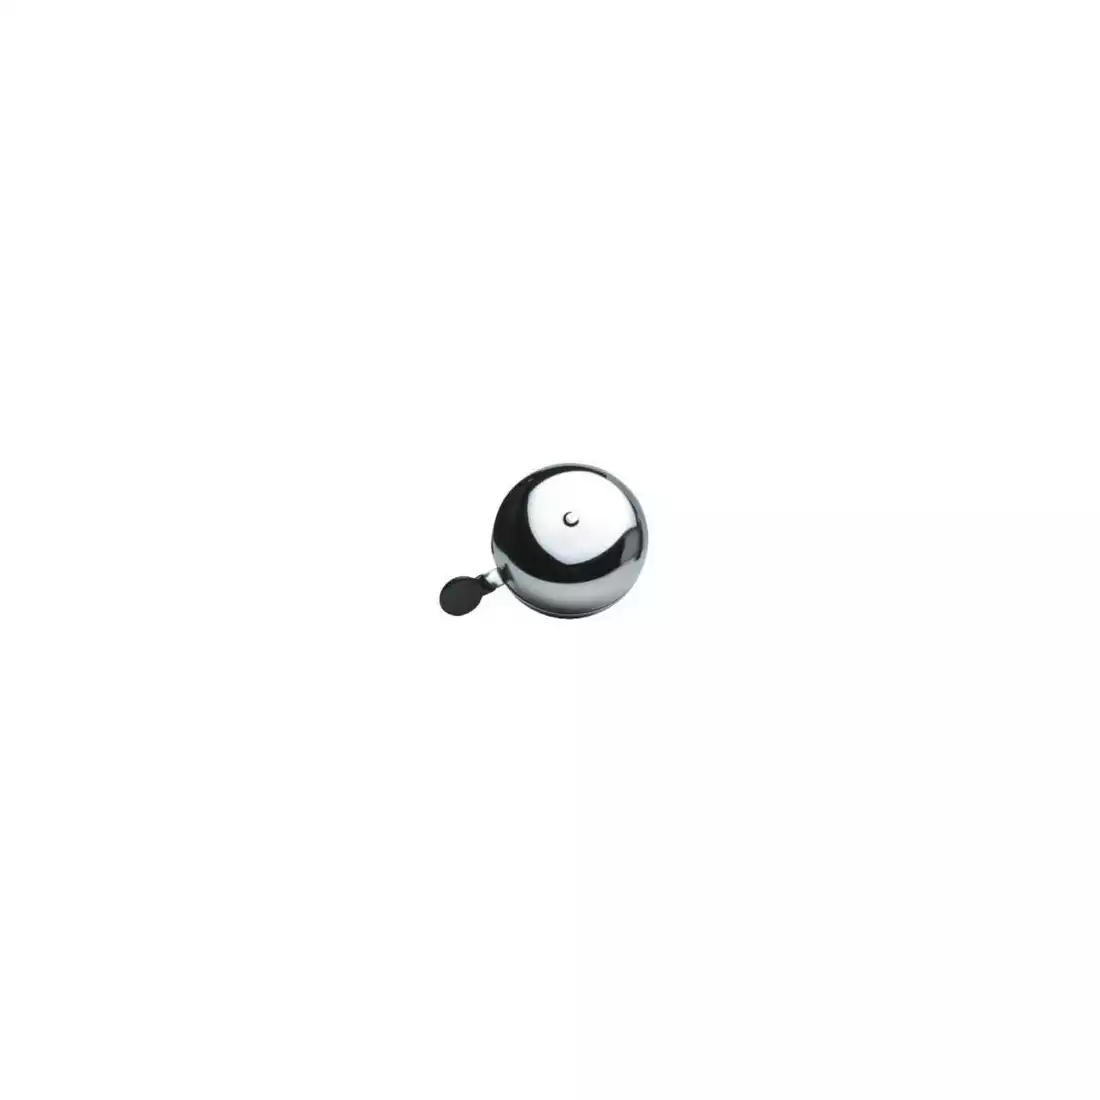 80mm Bike Bicycle Bell Ding Dong Sound Black 